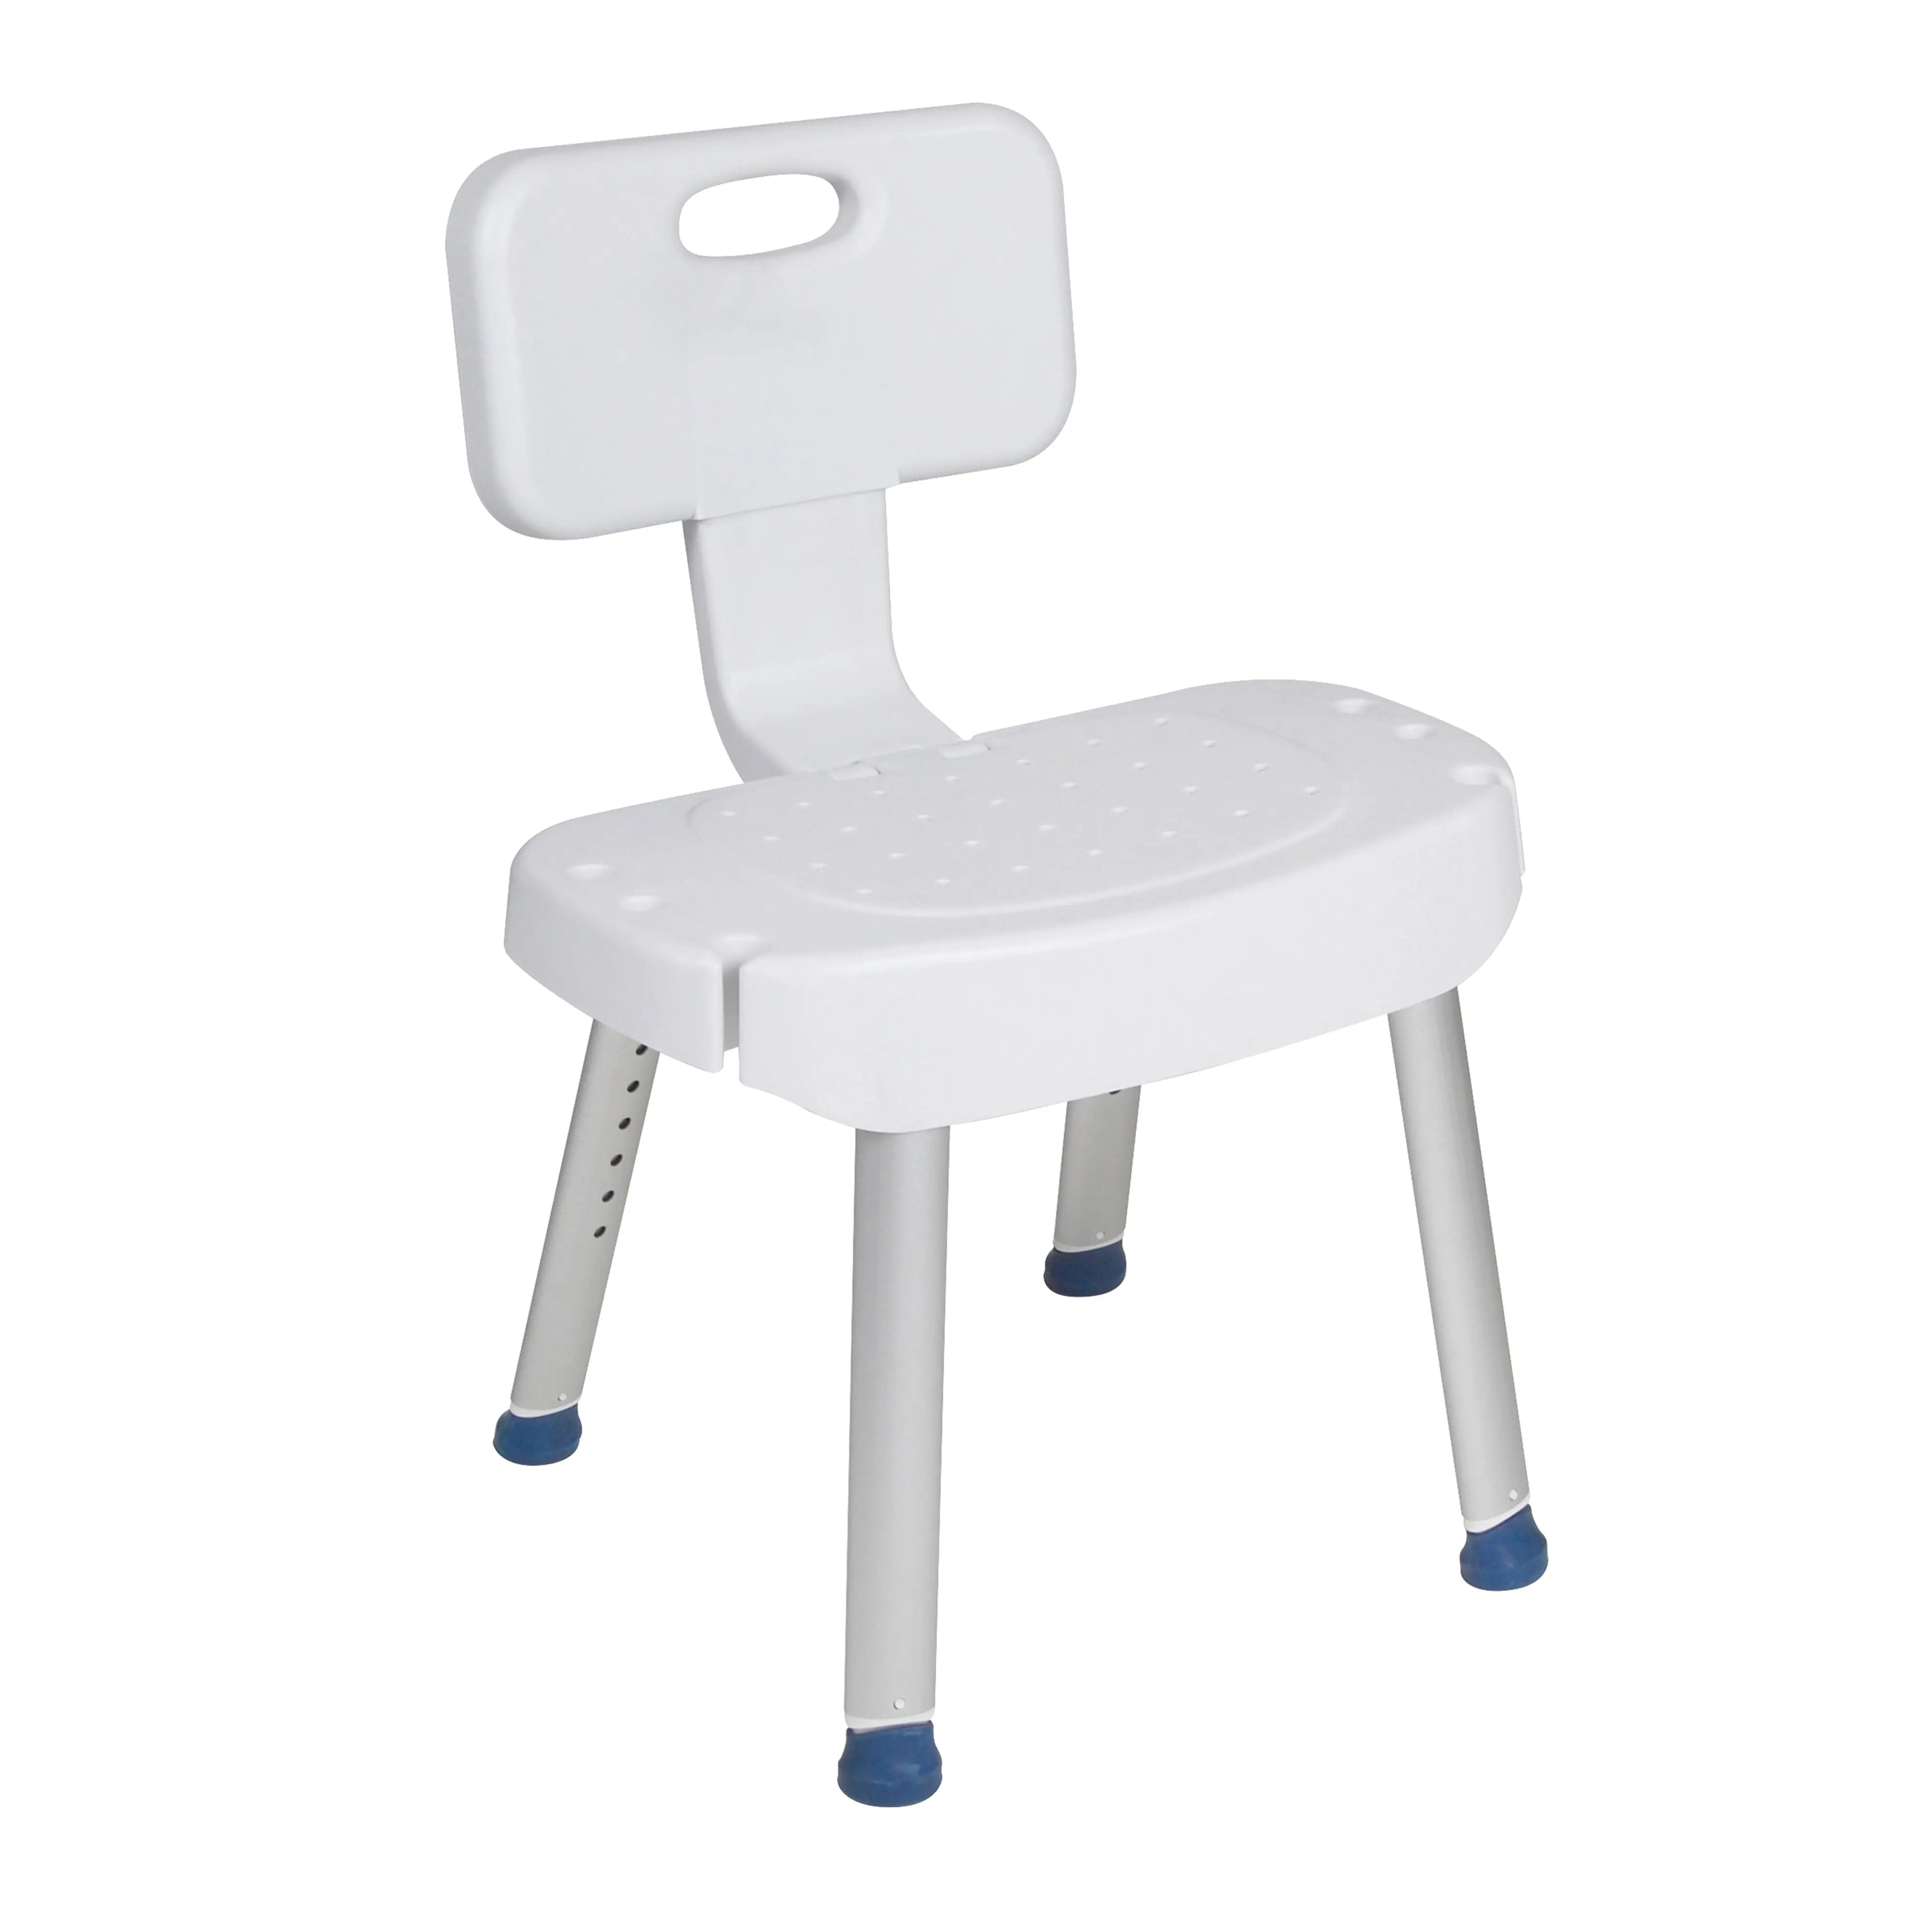 Bathroom Safety Shower Chair with Folding Back - Home Health Store Inc